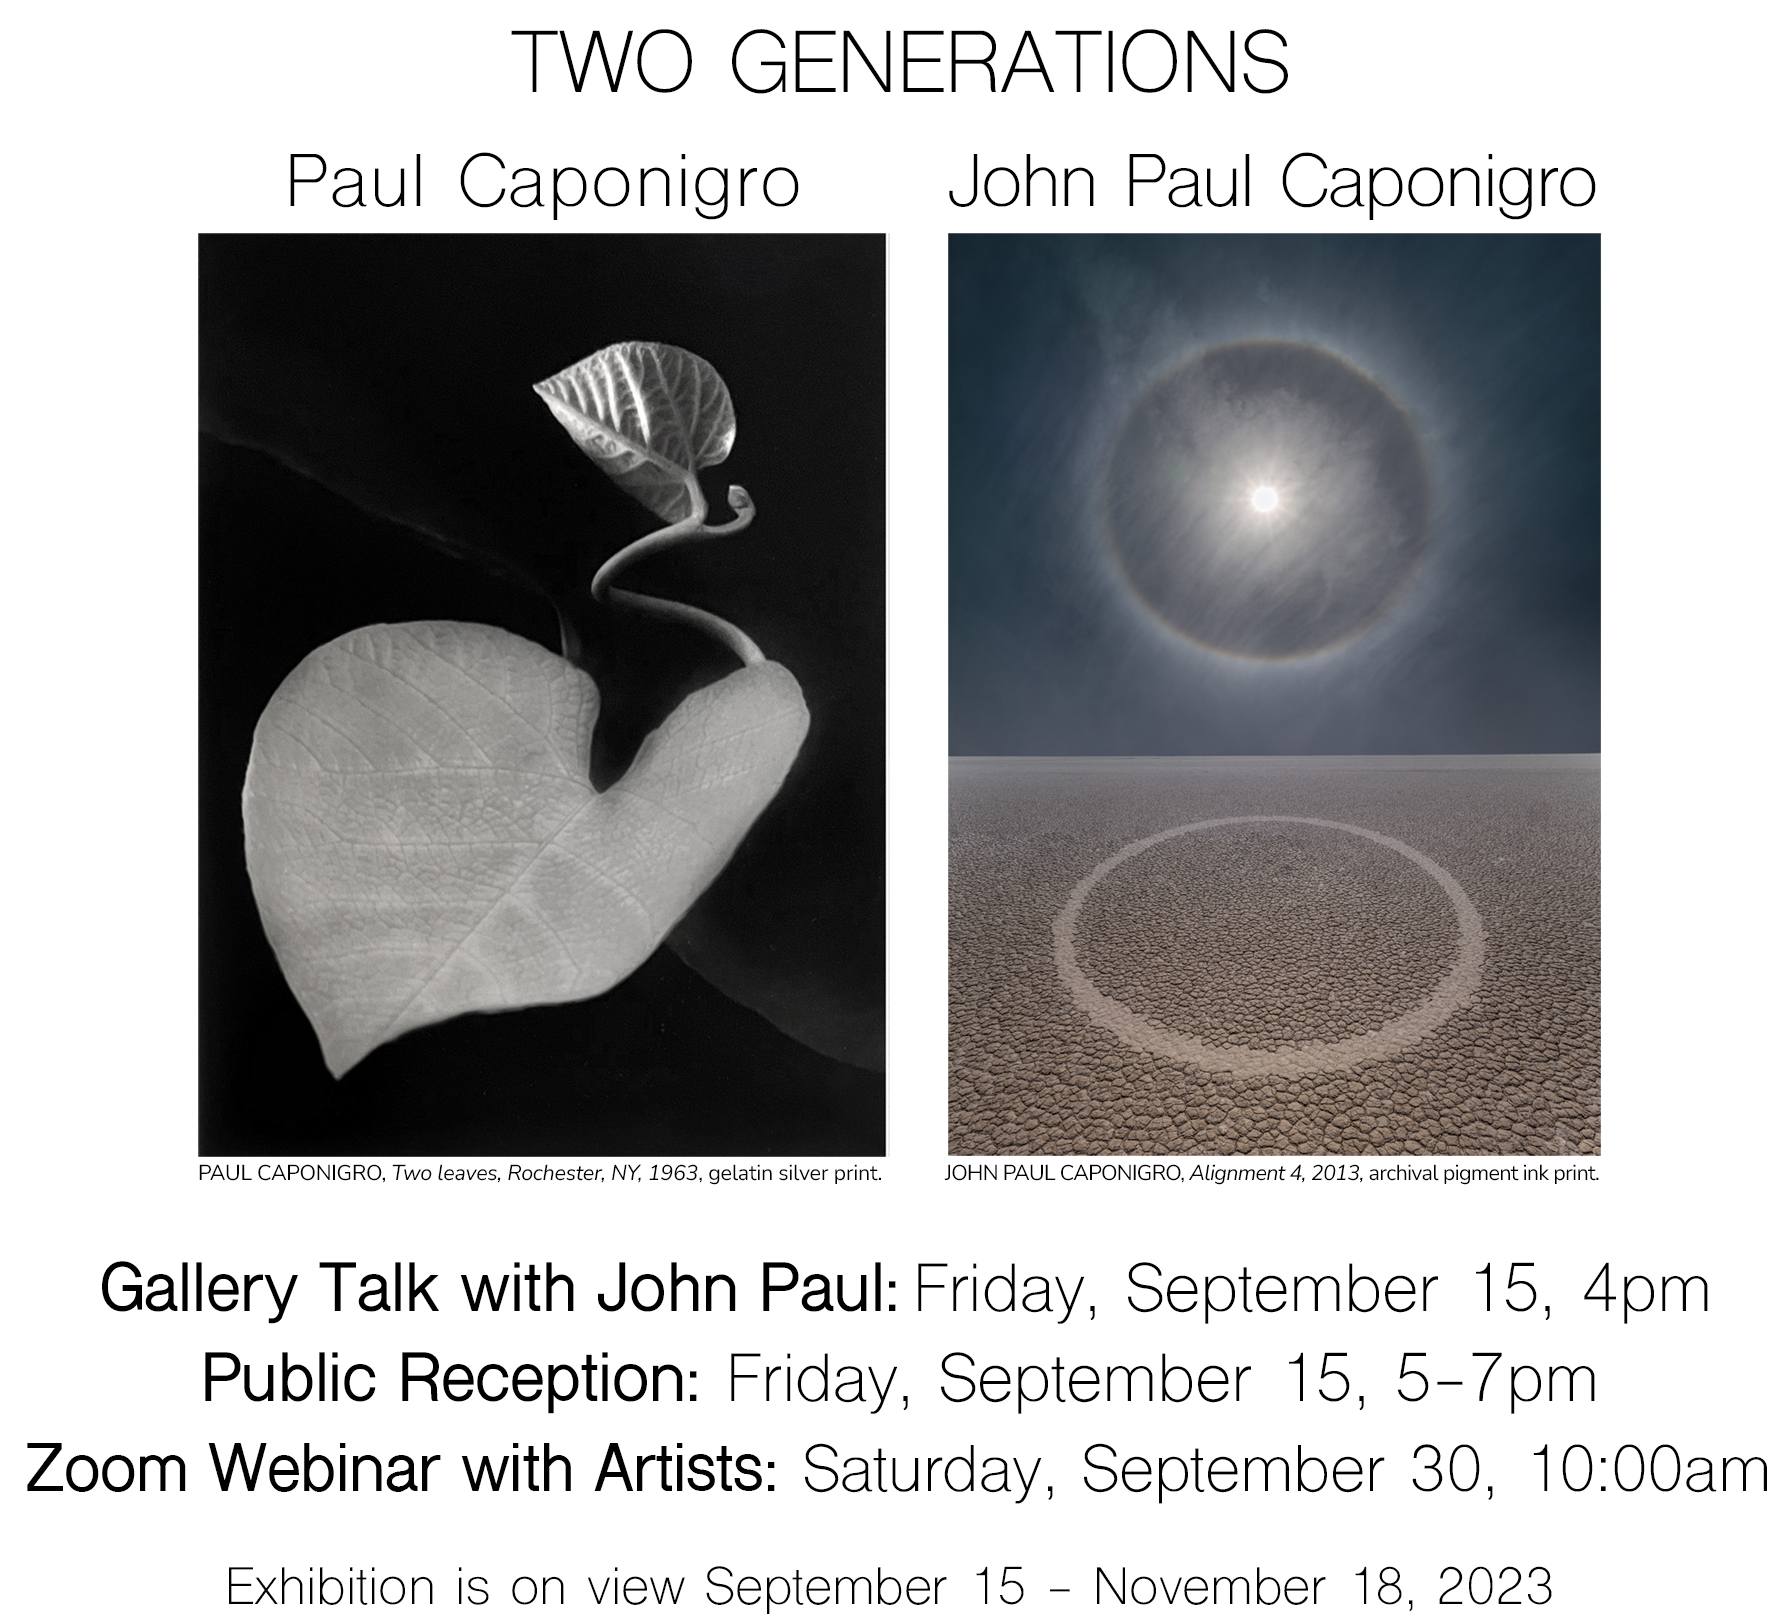 Two Generations : Paul Caponigro and John Paul Caponigro exhibition, September 15 artist reception 5-7pm. On view through November 18, 2023.